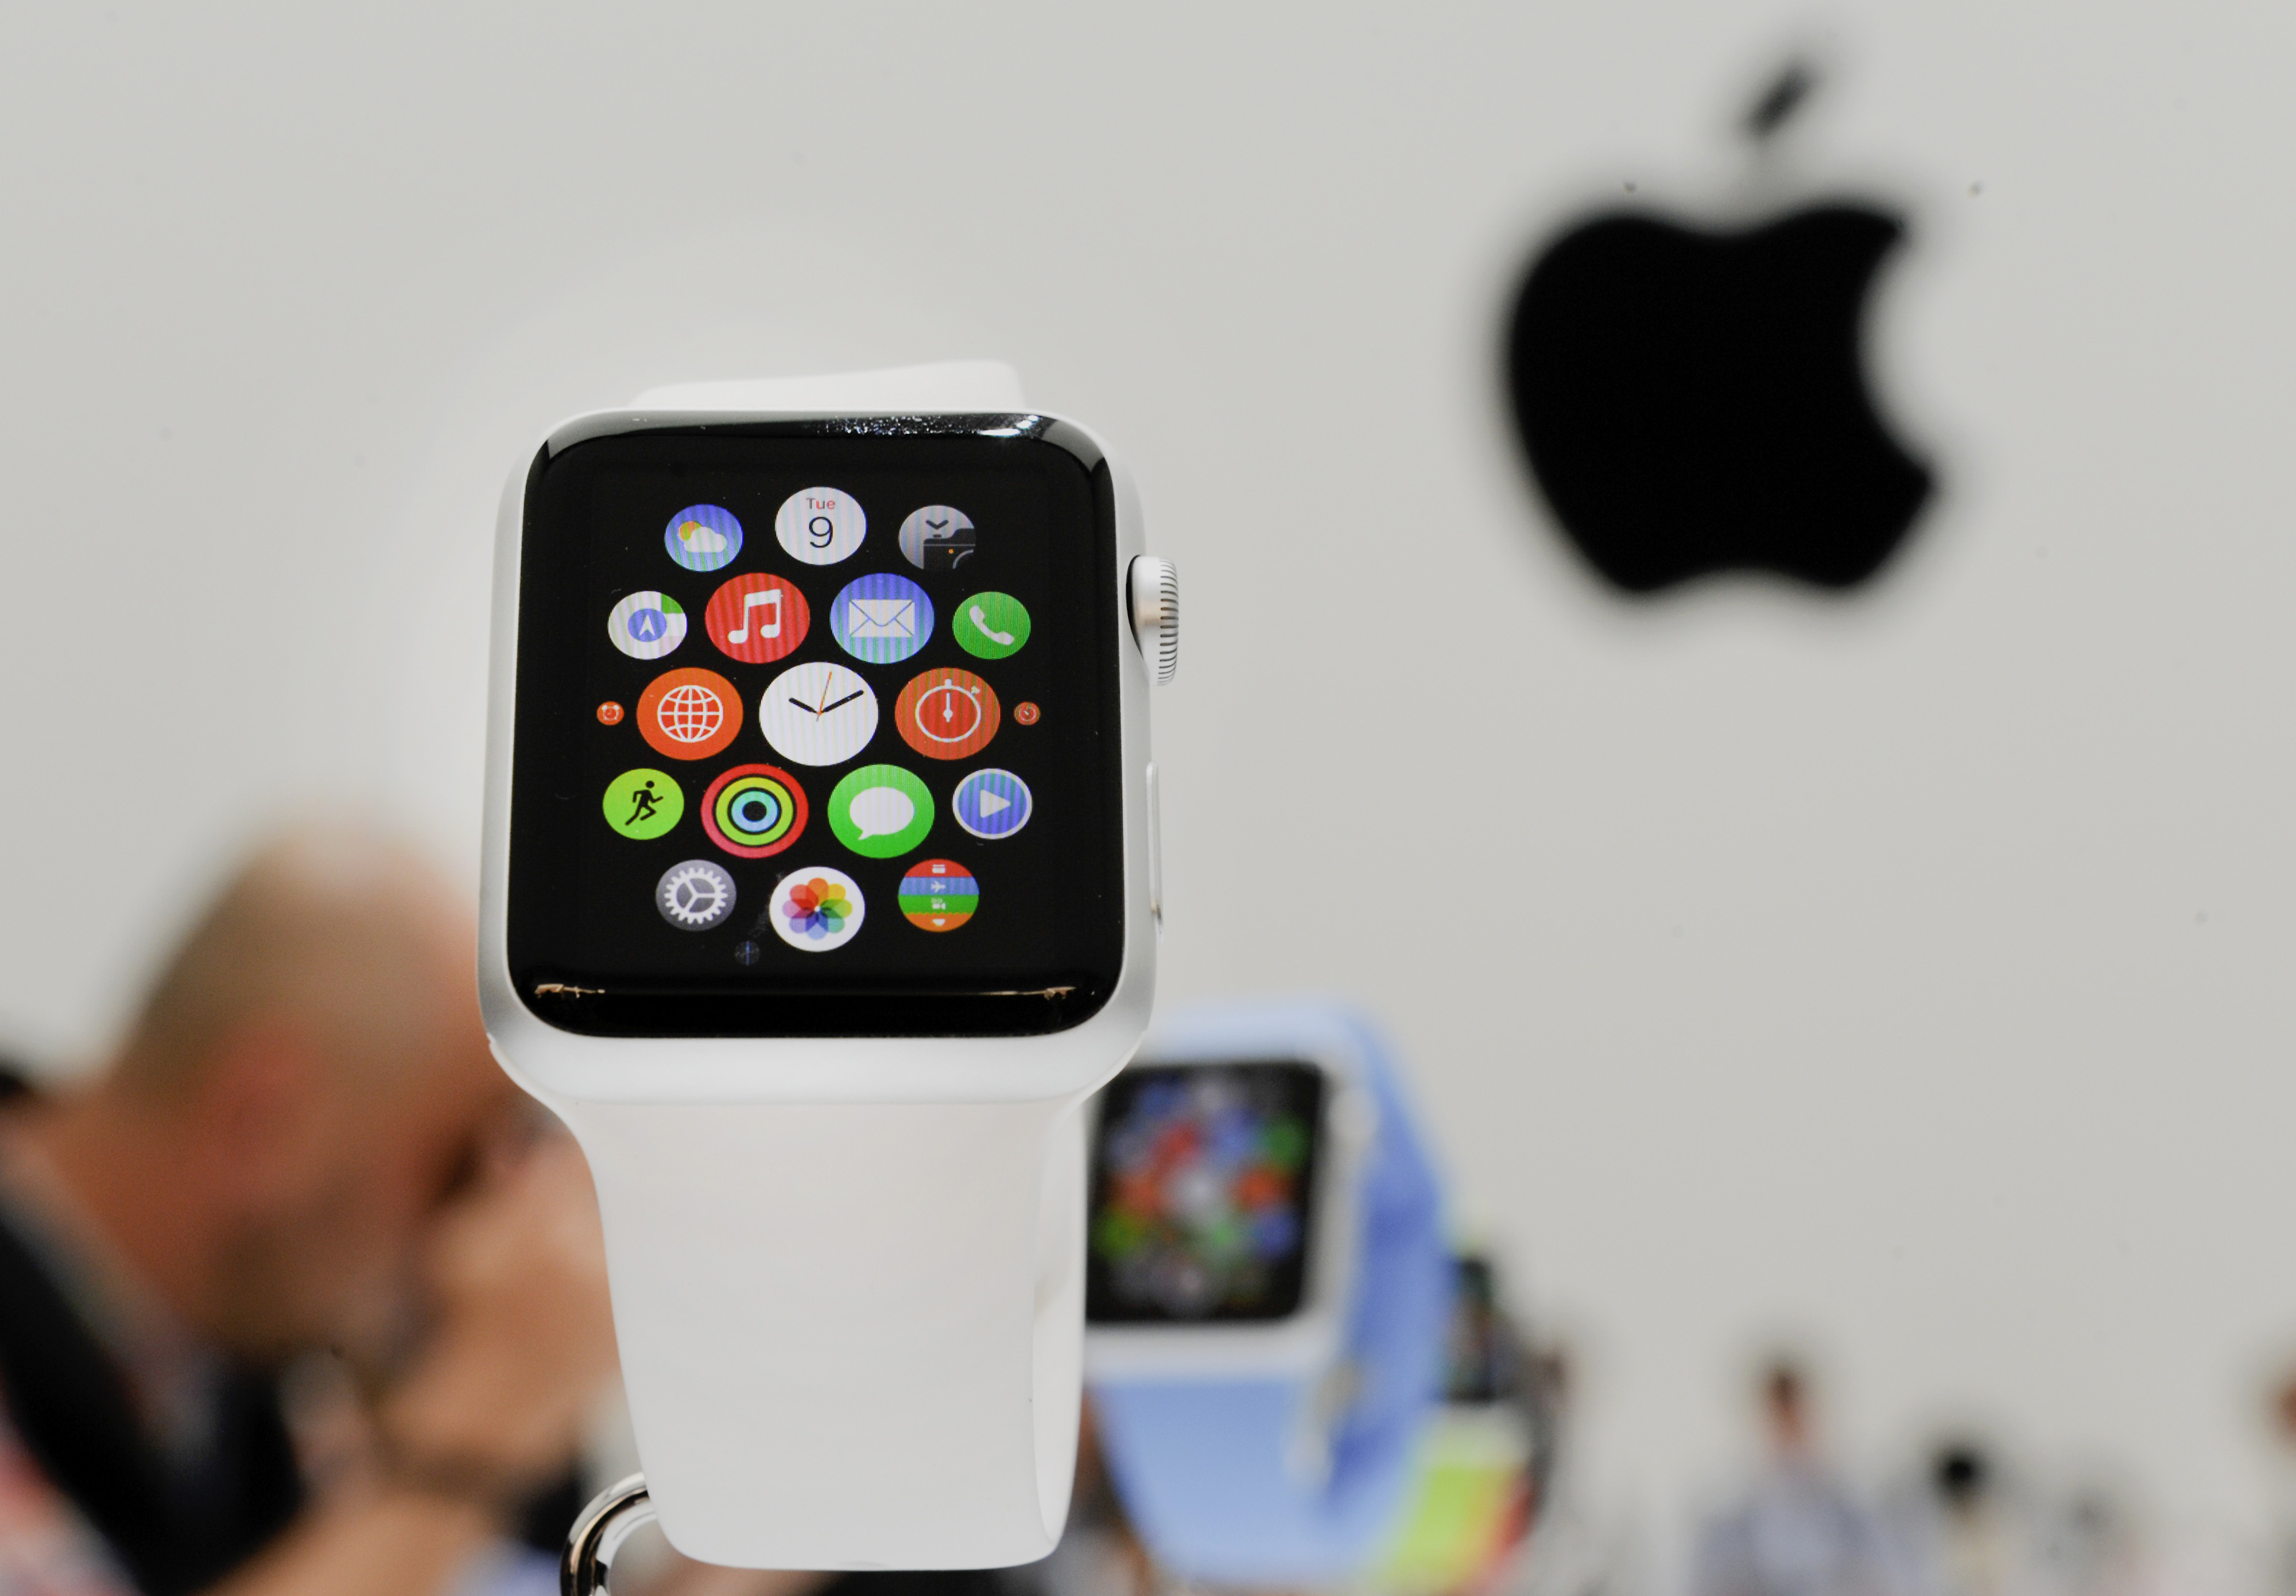 The Apple Watch is displayed after a product announcement at Flint Center in Cupertino, California, U.S., on Tuesday, Sept. 9, 2014. (Bloomberg—Bloomberg via Getty Images)